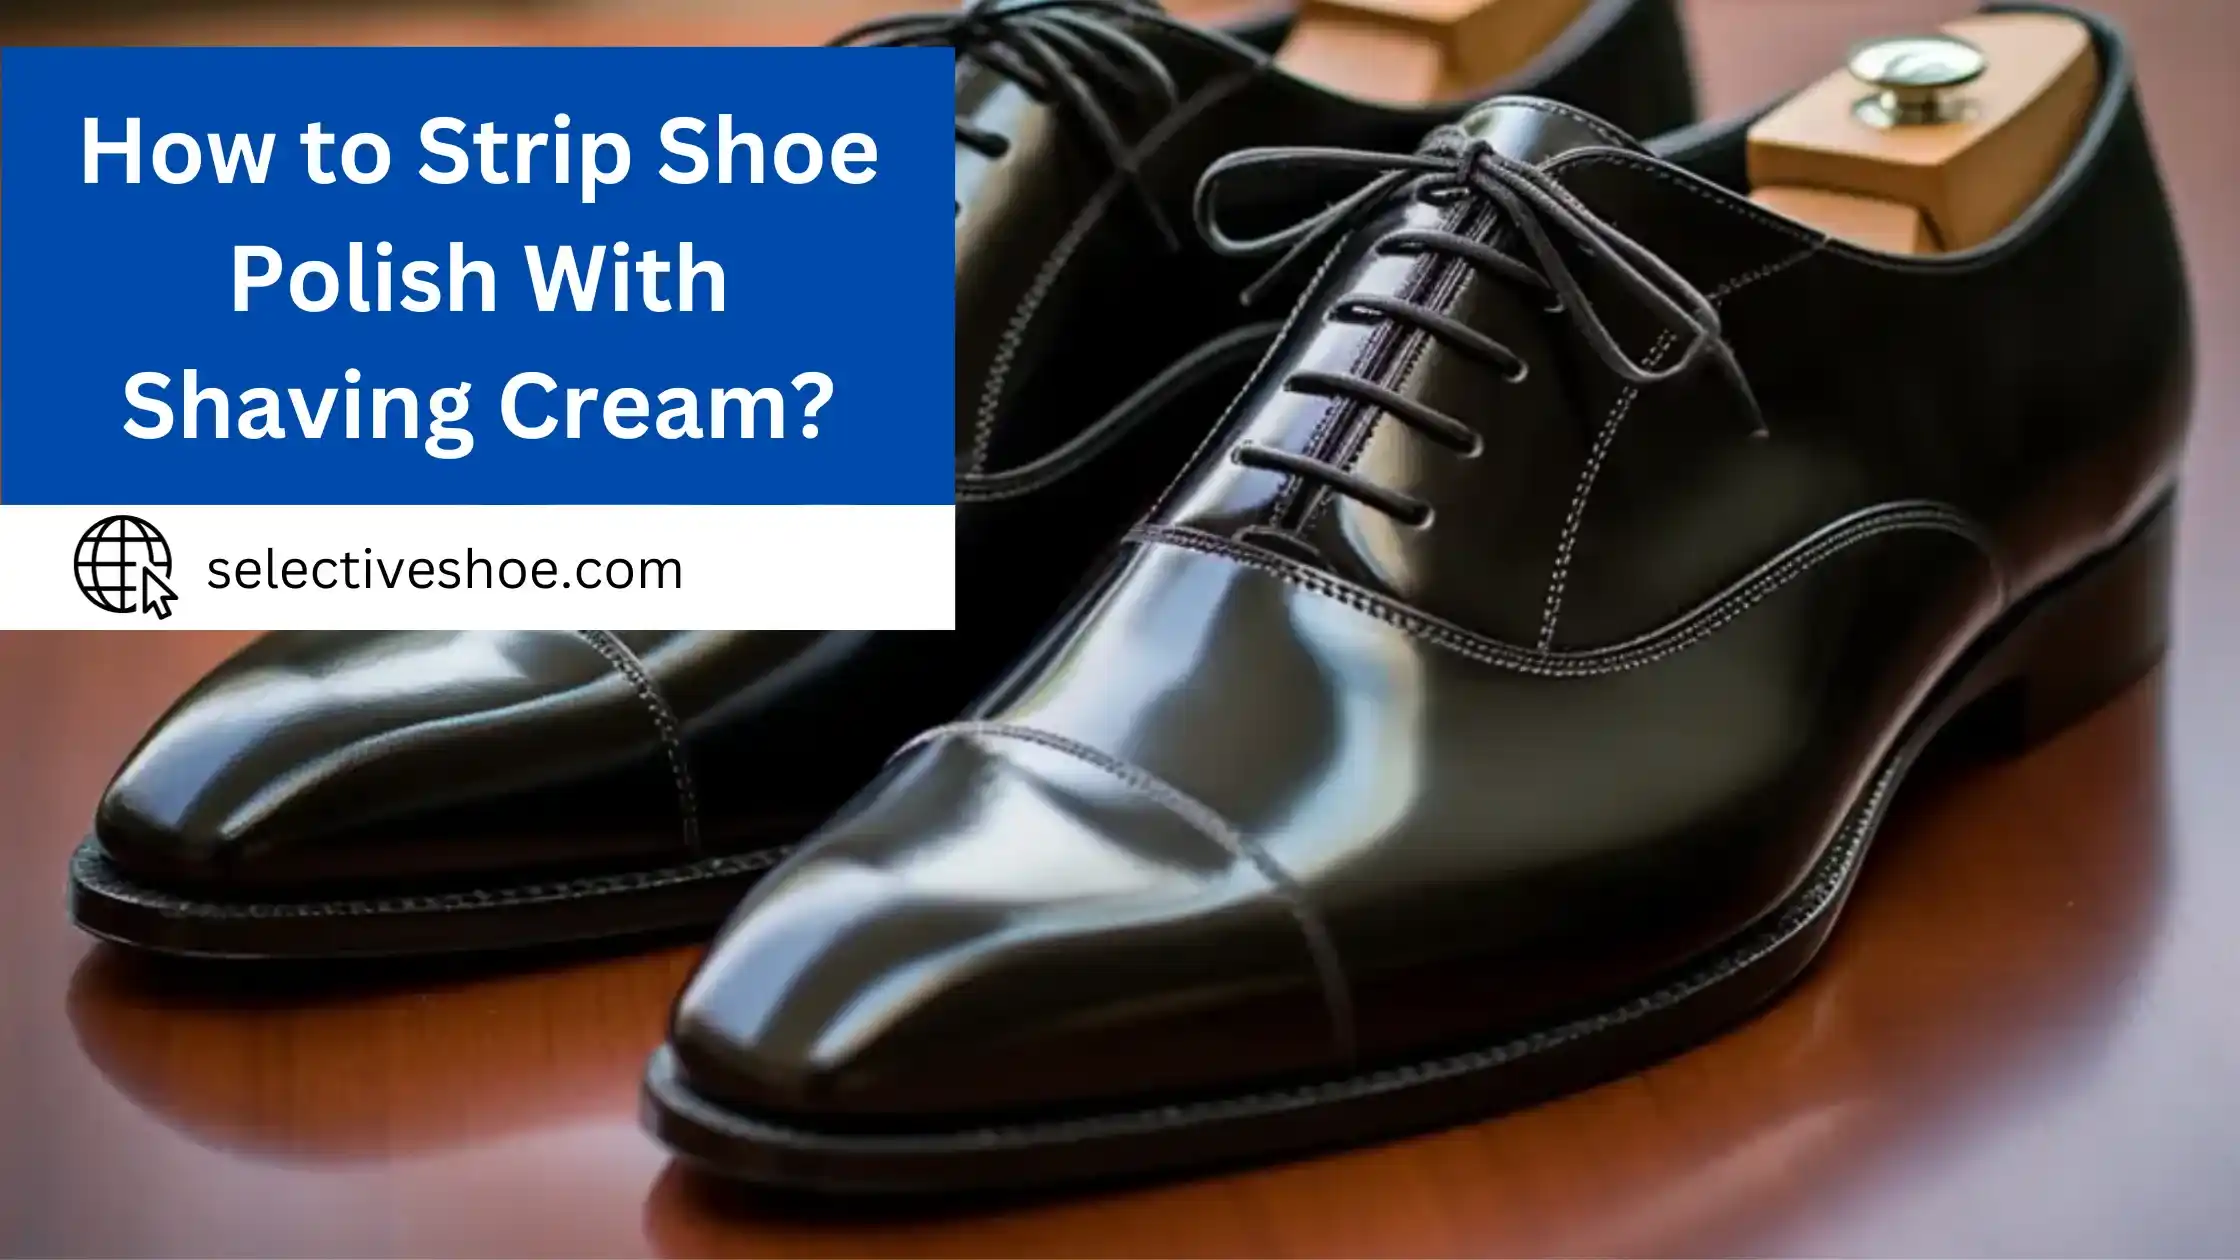 How to Strip Shoe Polish With Shaving Cream? Simple Guide